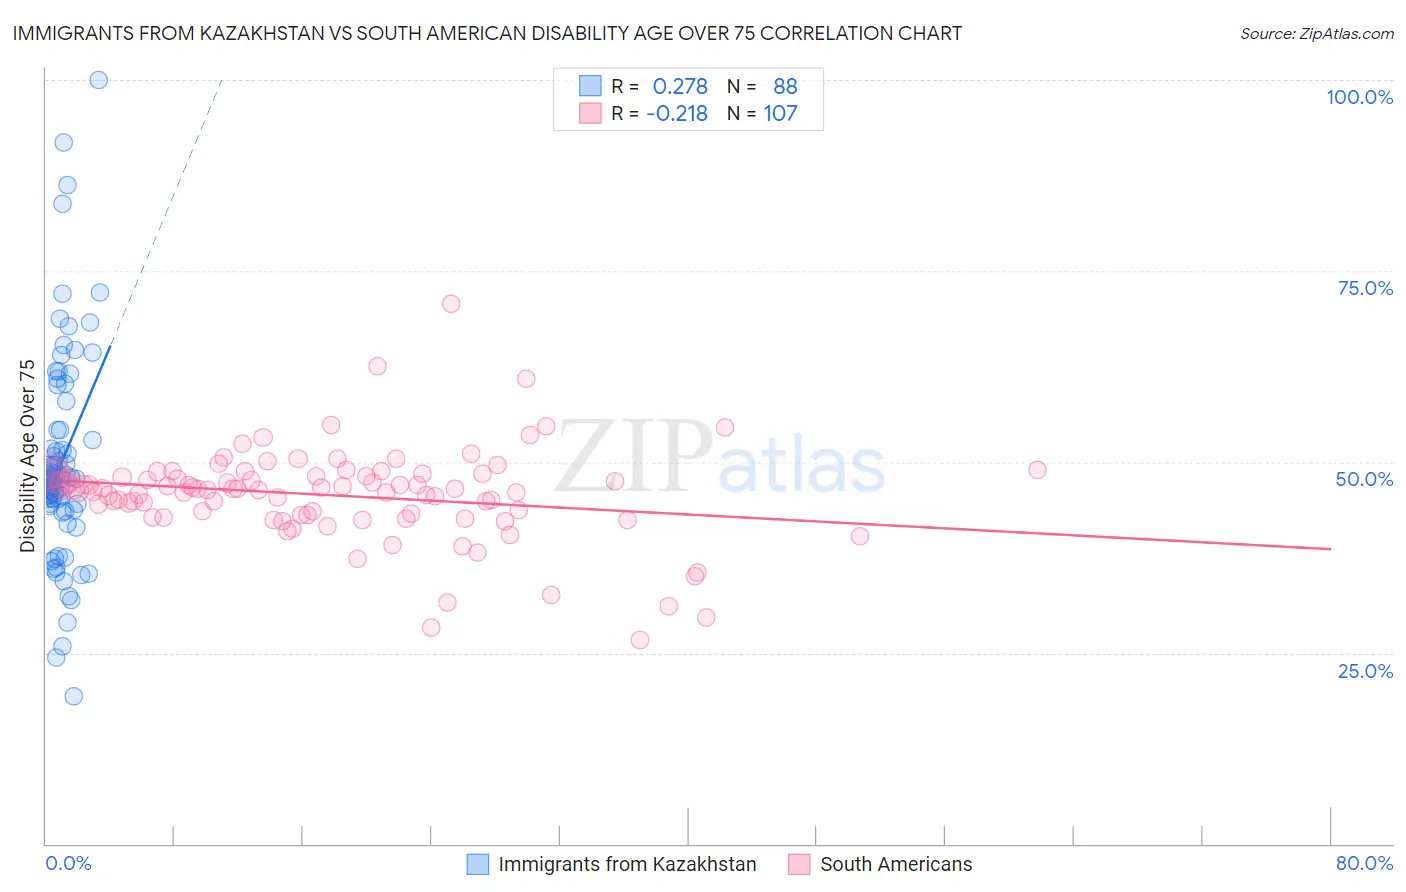 Immigrants from Kazakhstan vs South American Disability Age Over 75